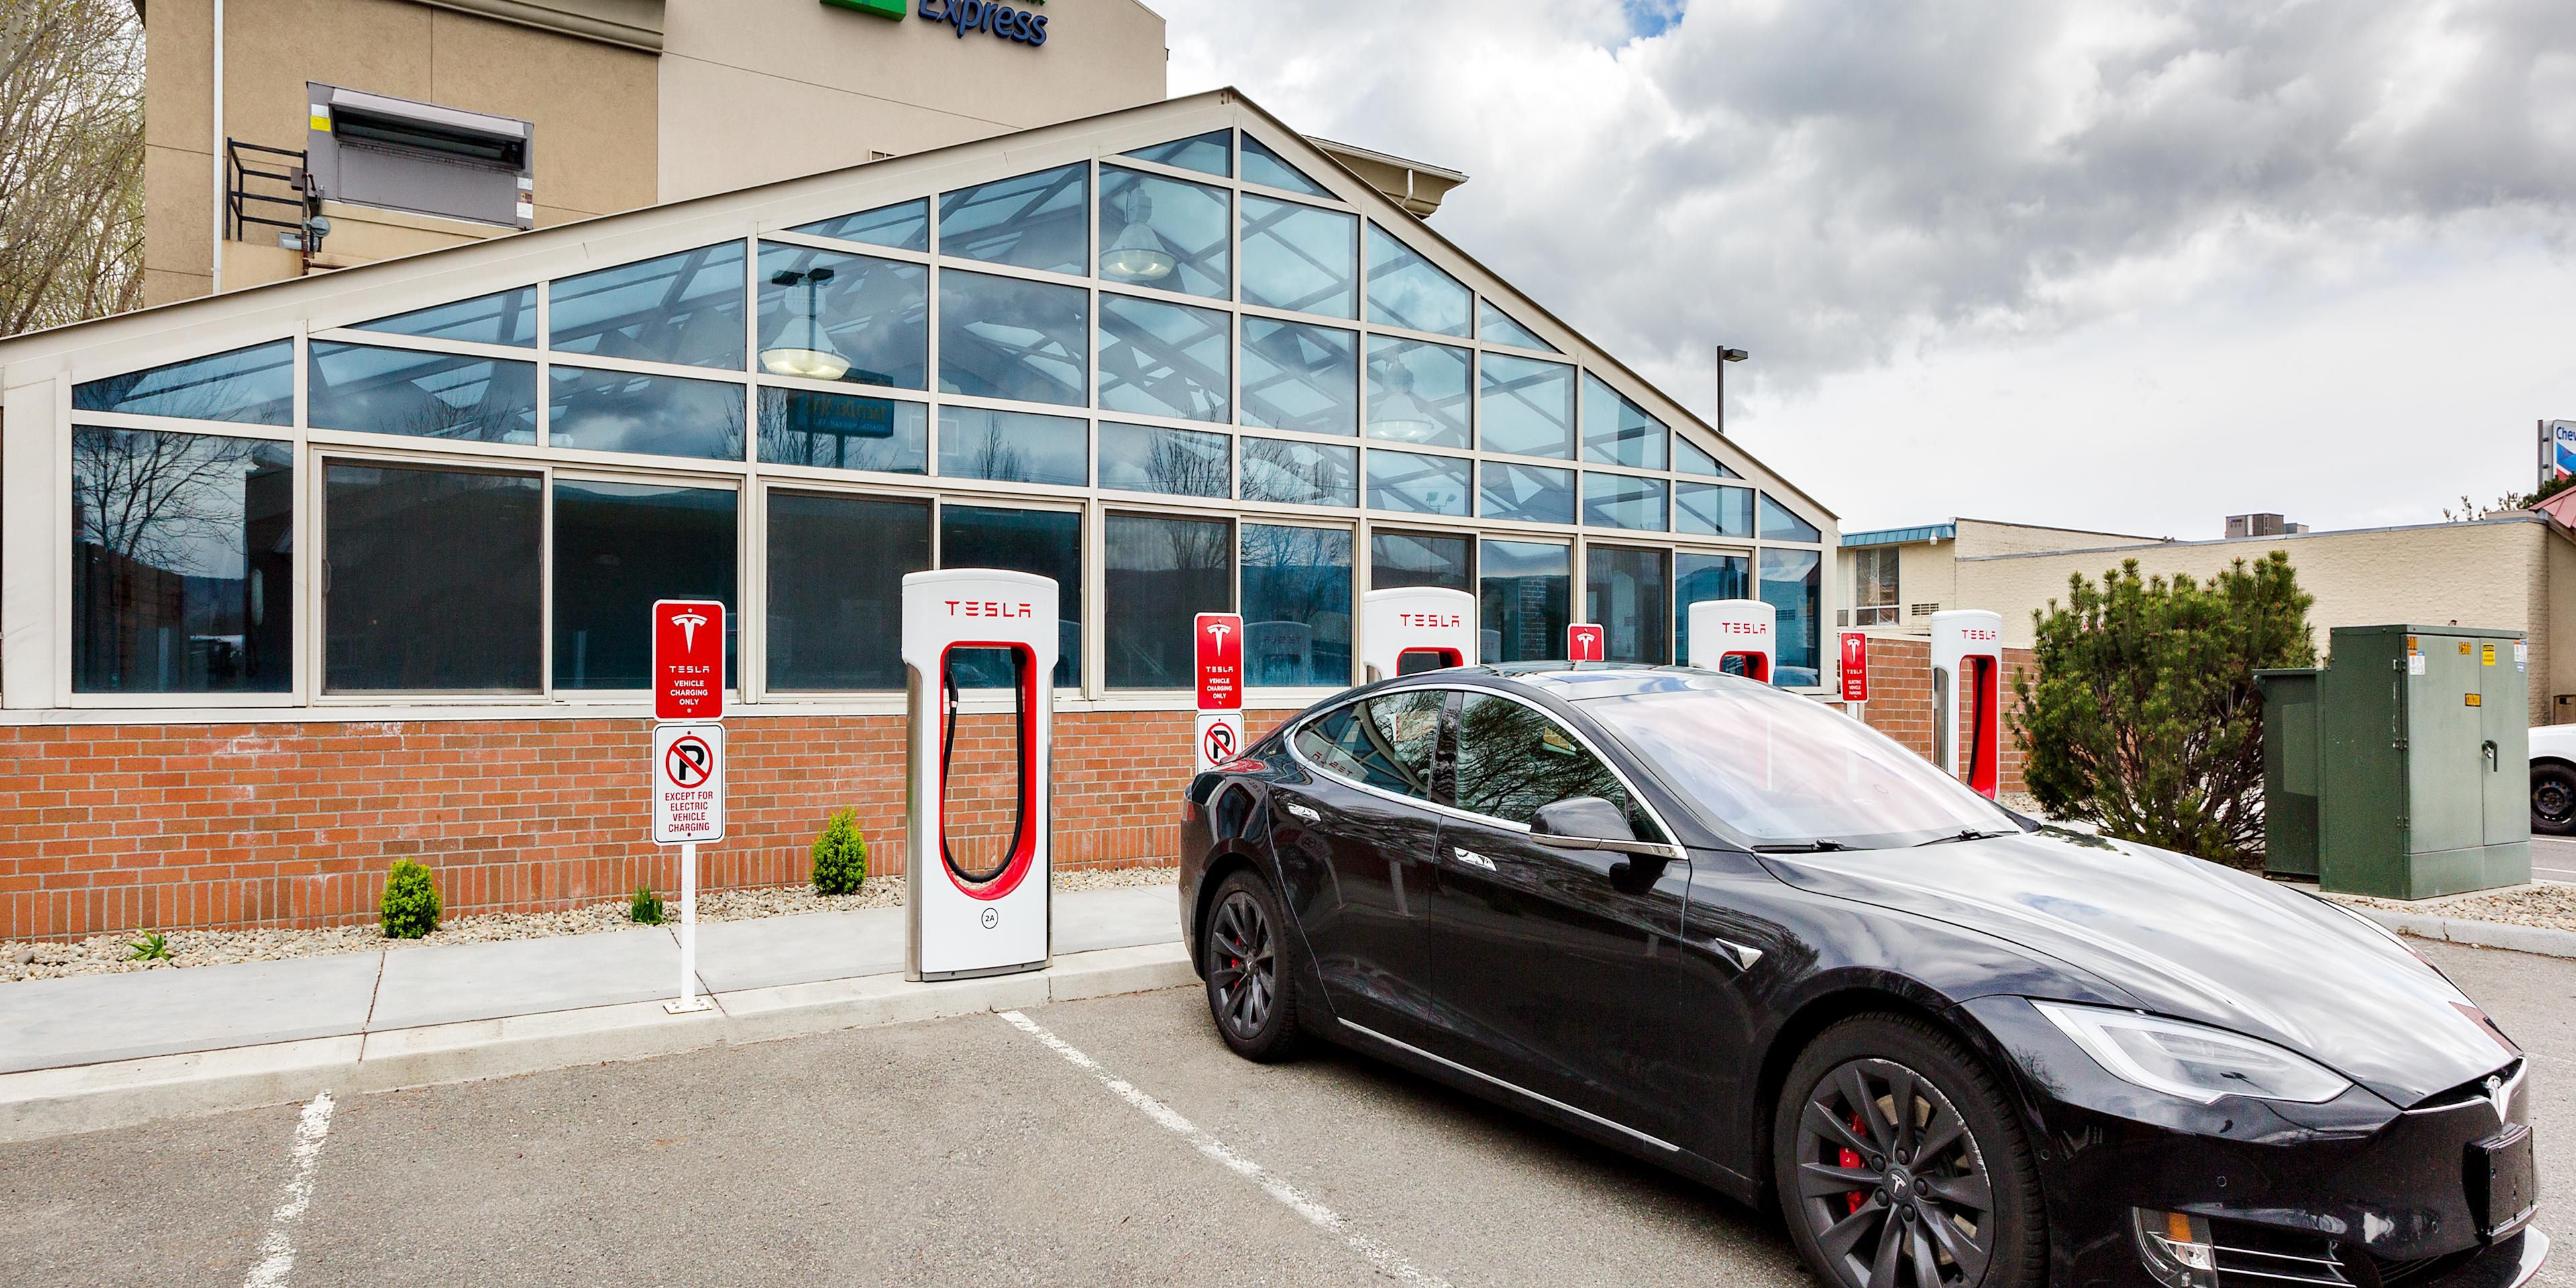 Overnight guests charge up for free with our Tesla Supercharger station. No matter if you’re attending a convention in downtown Ellensburg, or just stopping over on your PNW adventure, you’ll never worry about not having enough juice for your car. Just look out for our Tesla vehicle charging sign, pull up, charge, and enjoy your stay with us! 